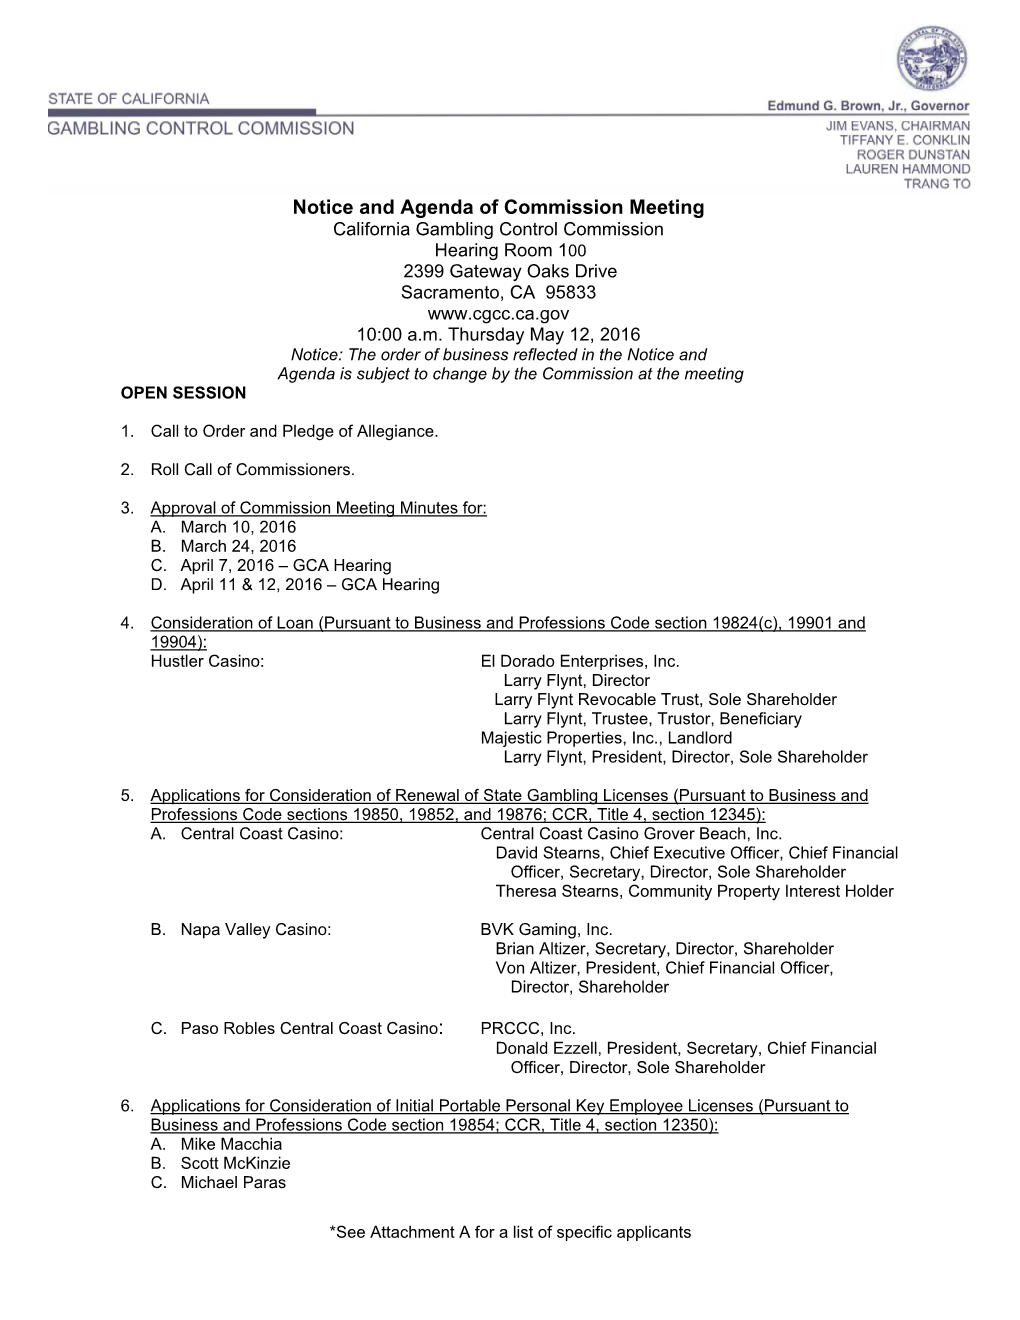 Notice and Agenda of Commission Meeting California Gambling Control Commission Hearing Room 100 2399 Gateway Oaks Drive Sacramento, CA 95833 10:00 A.M